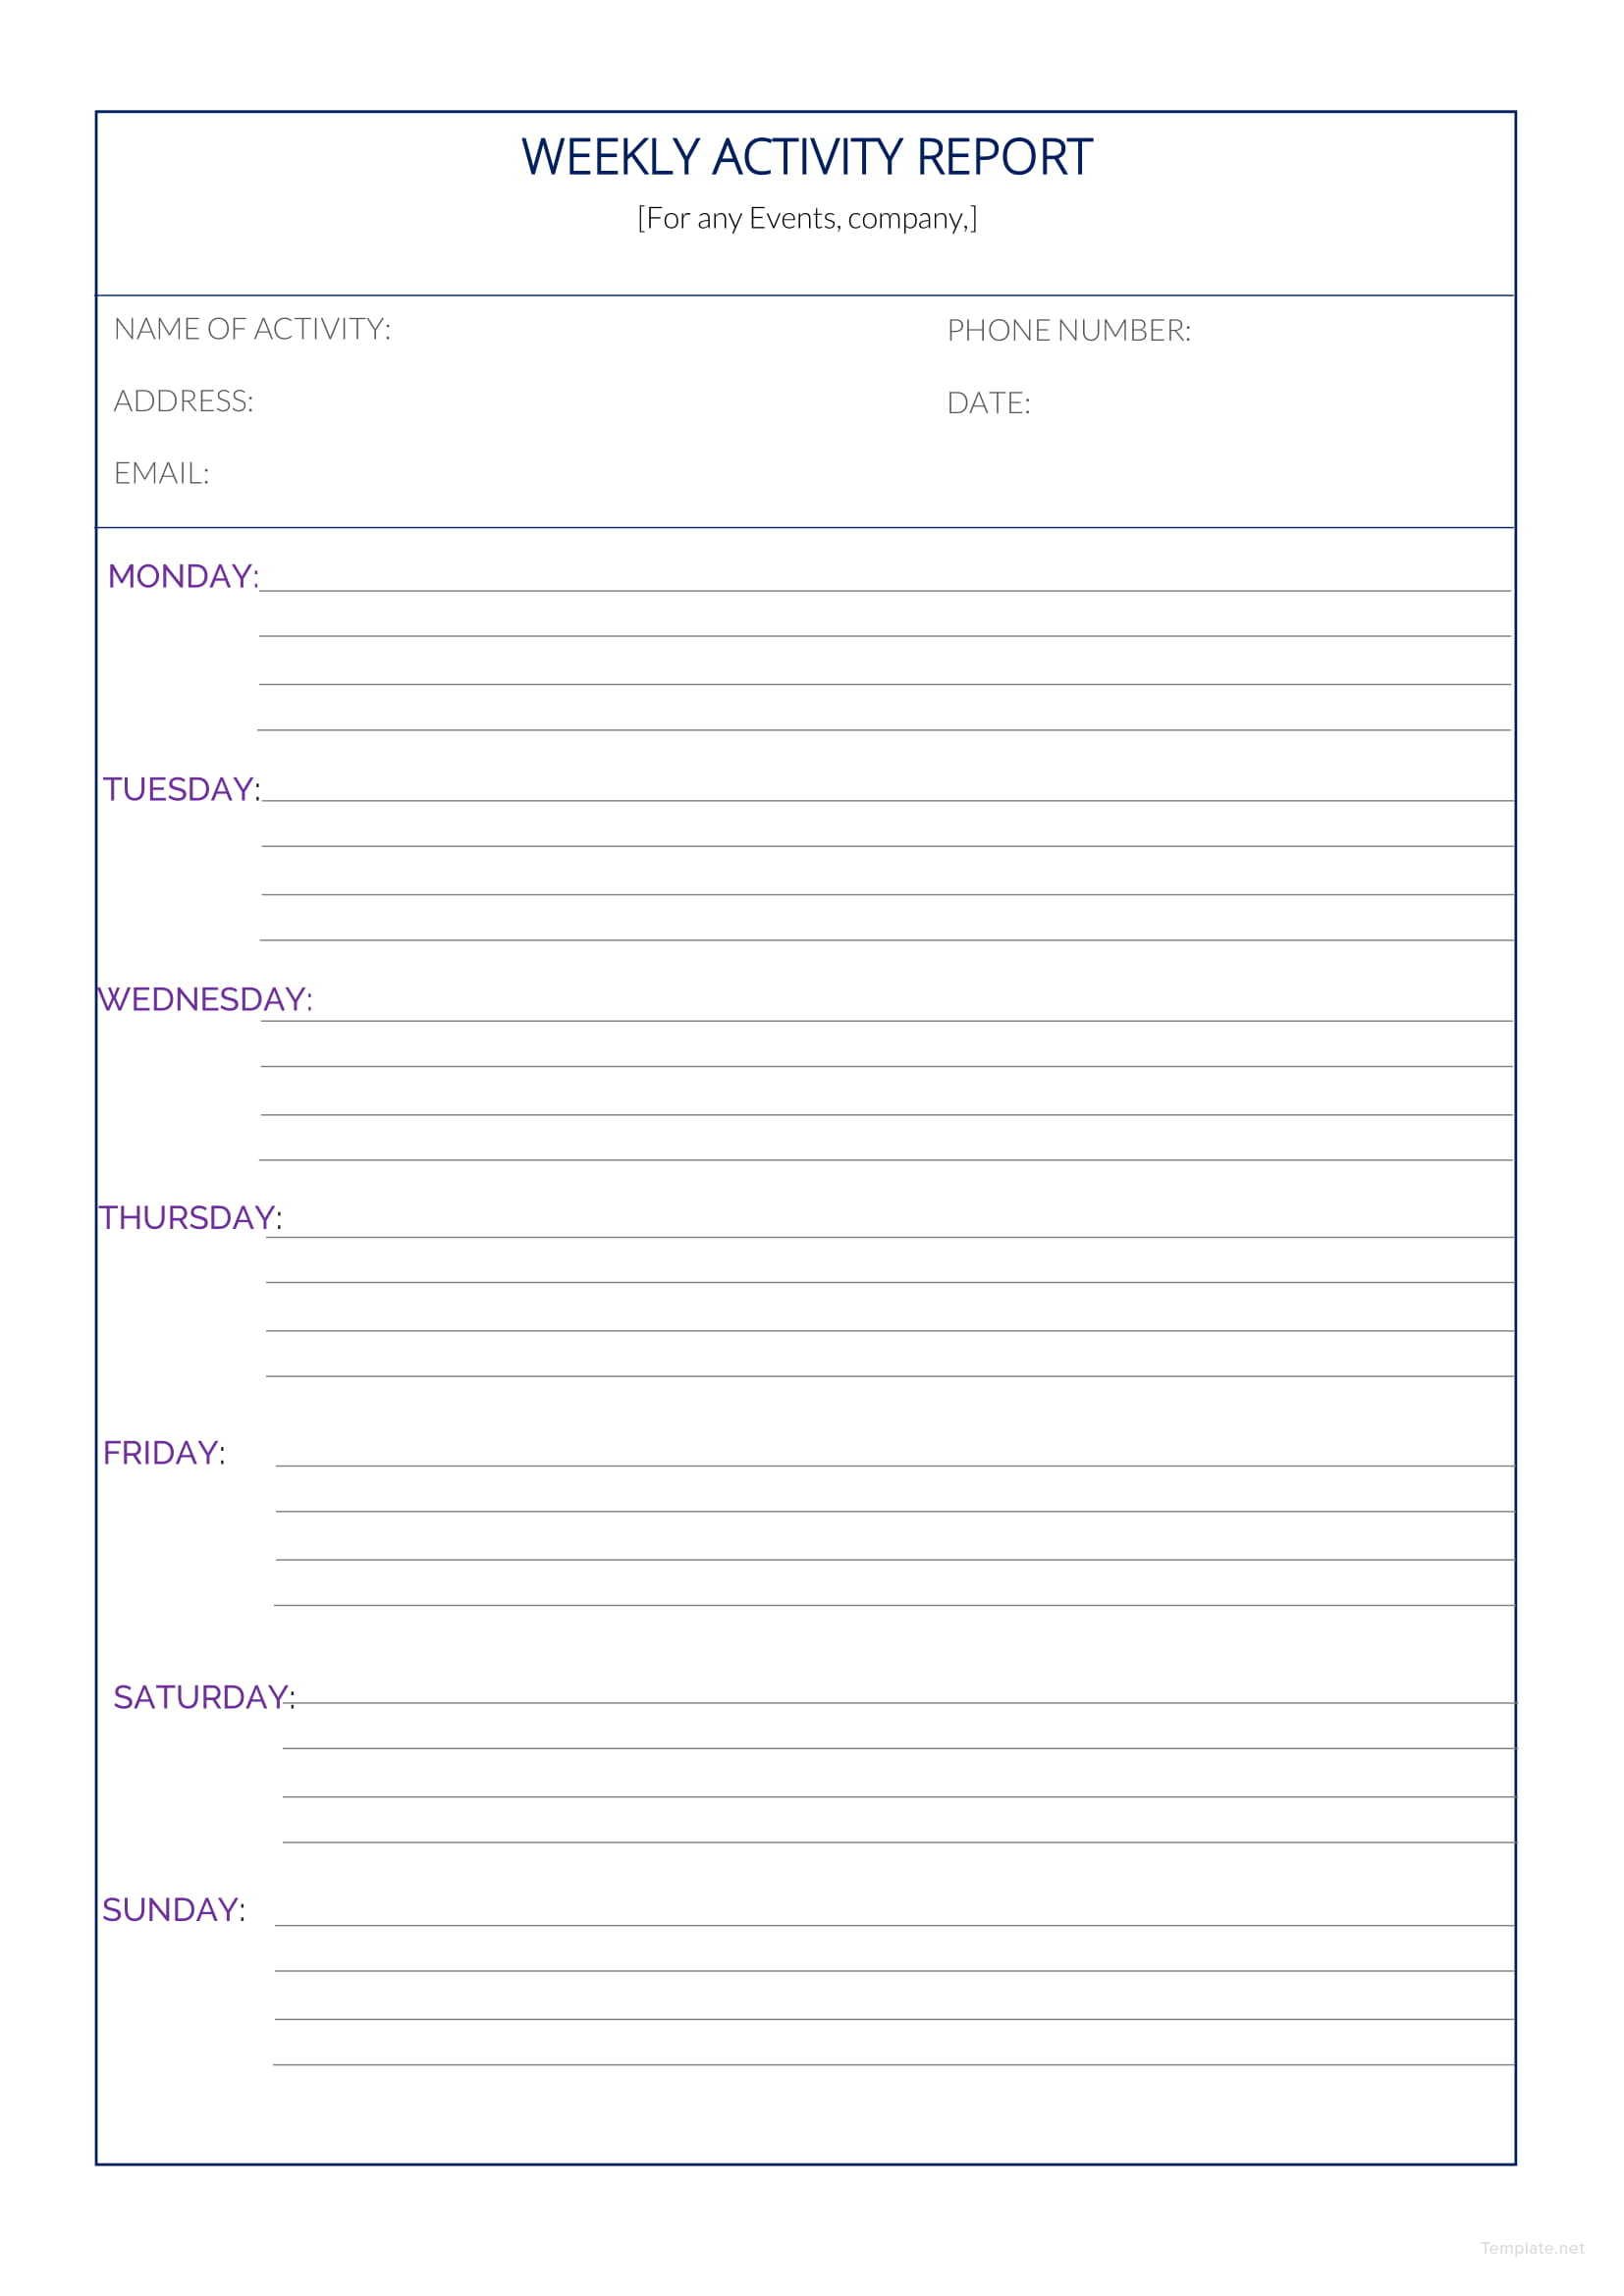 Sample Weekly Activity Report Template in Microsoft Word